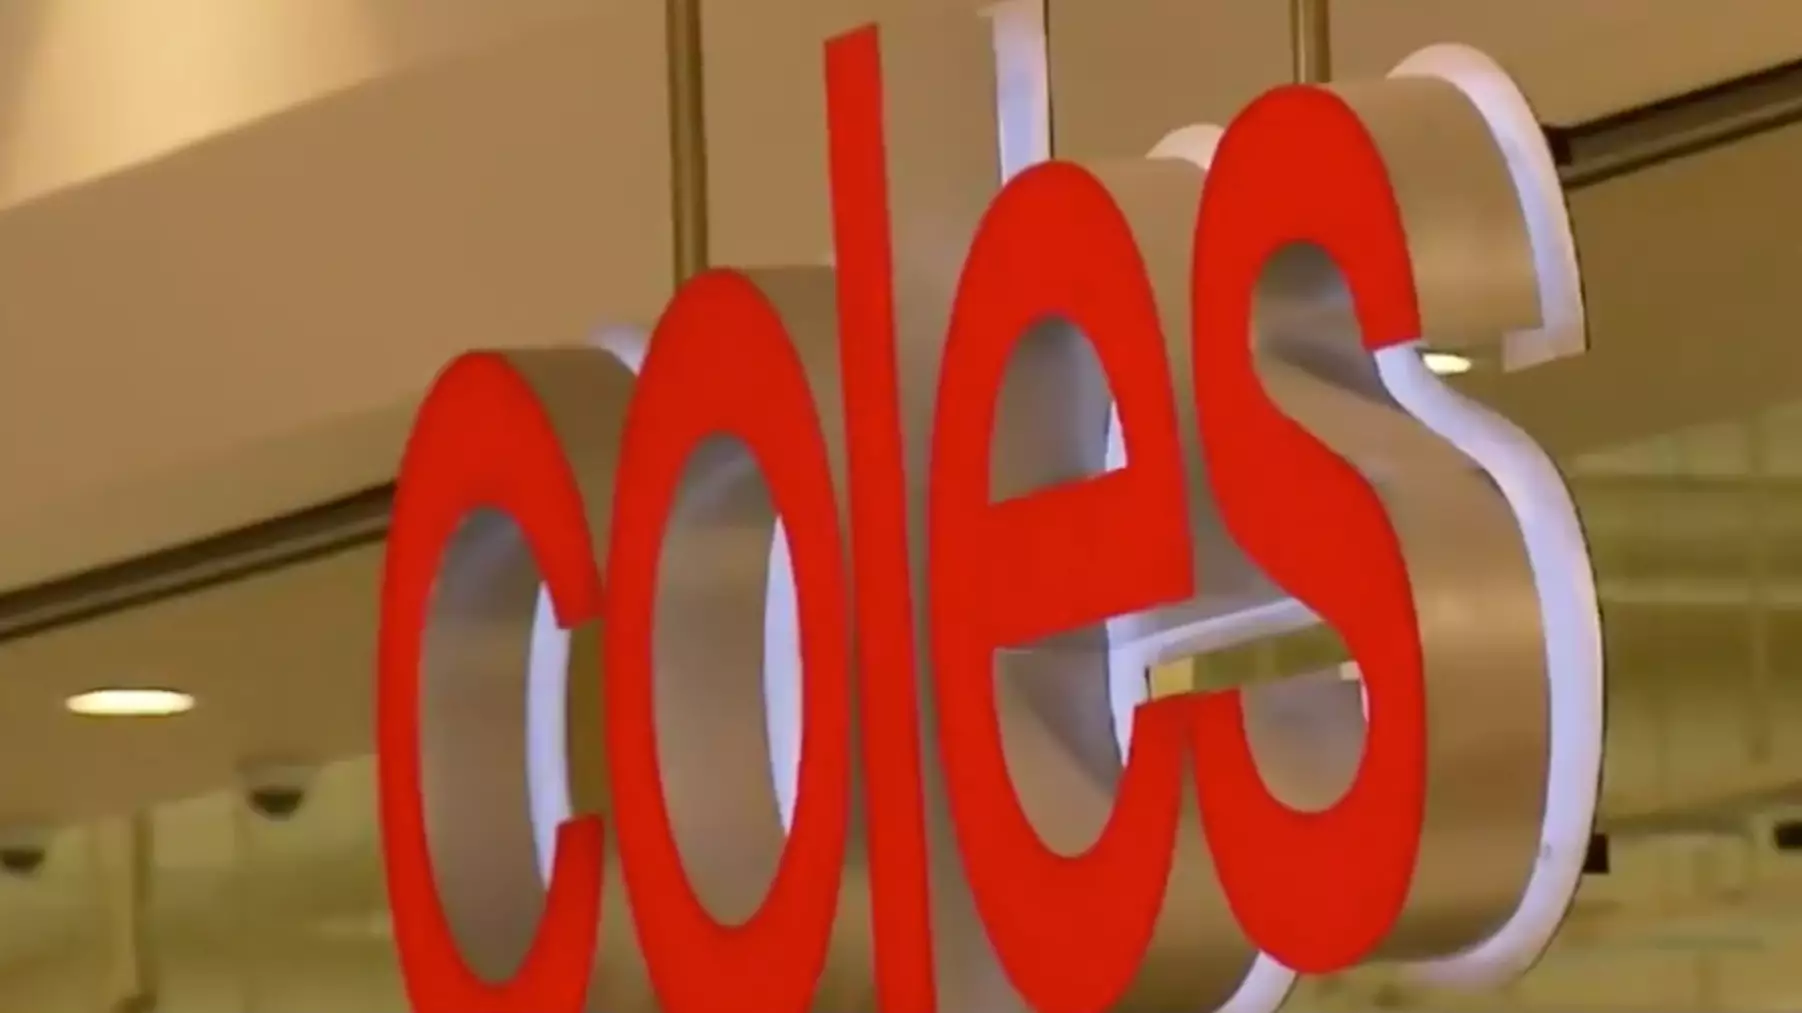 Coles To Start Selling Ugly Fruit And Vegetables To Stop Unwanted Food Going To Landfill